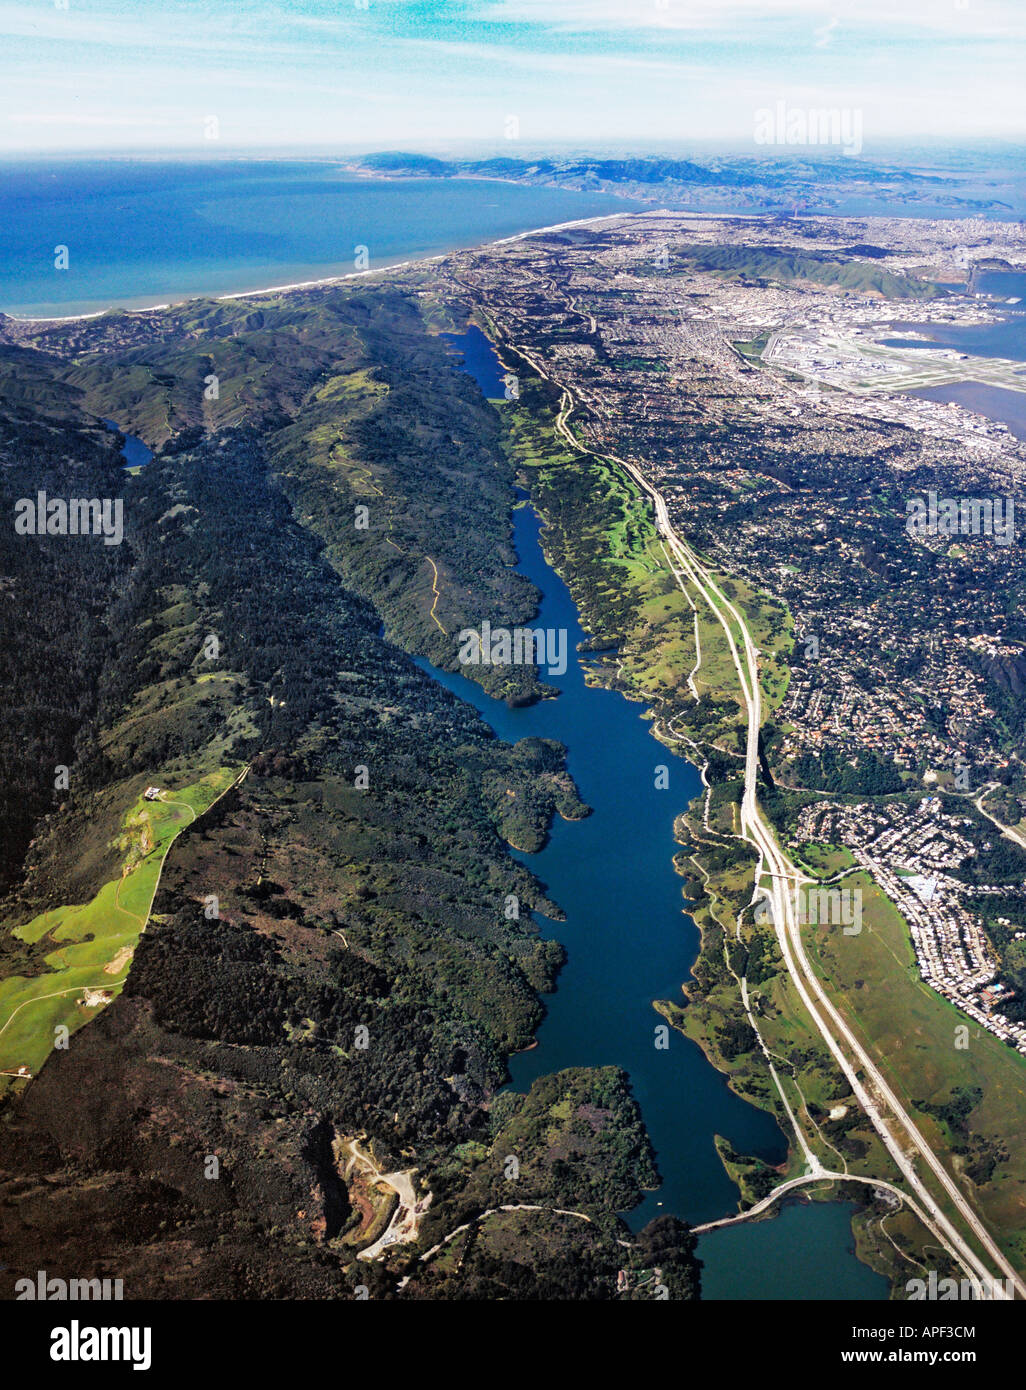 aerial above San Andreas fault line Crystal Springs reservoir CA interstate I-280 San Francisco and Pacific ocean in background Stock Photo